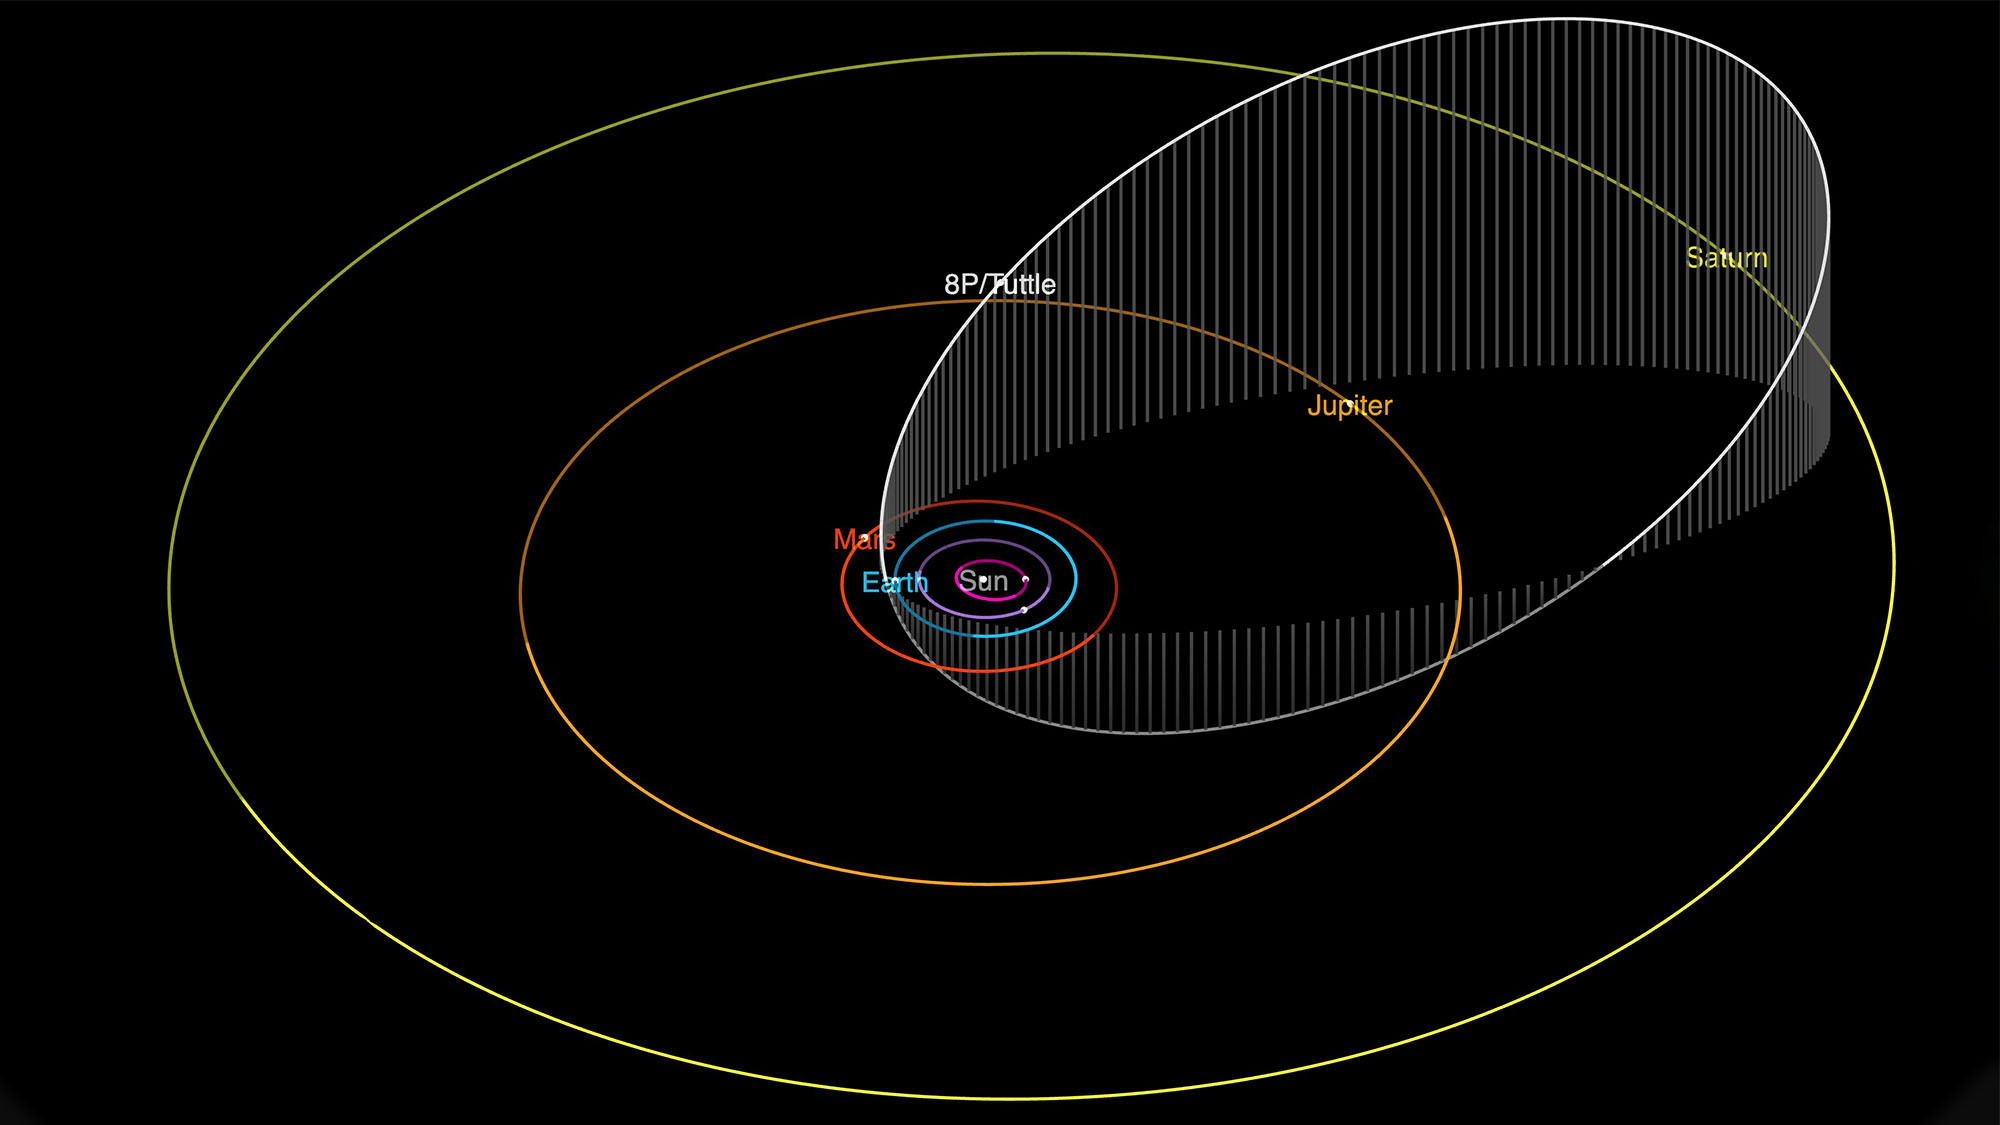 This trajectory map shows comet 8P/Tuttle's movement through the solar system.